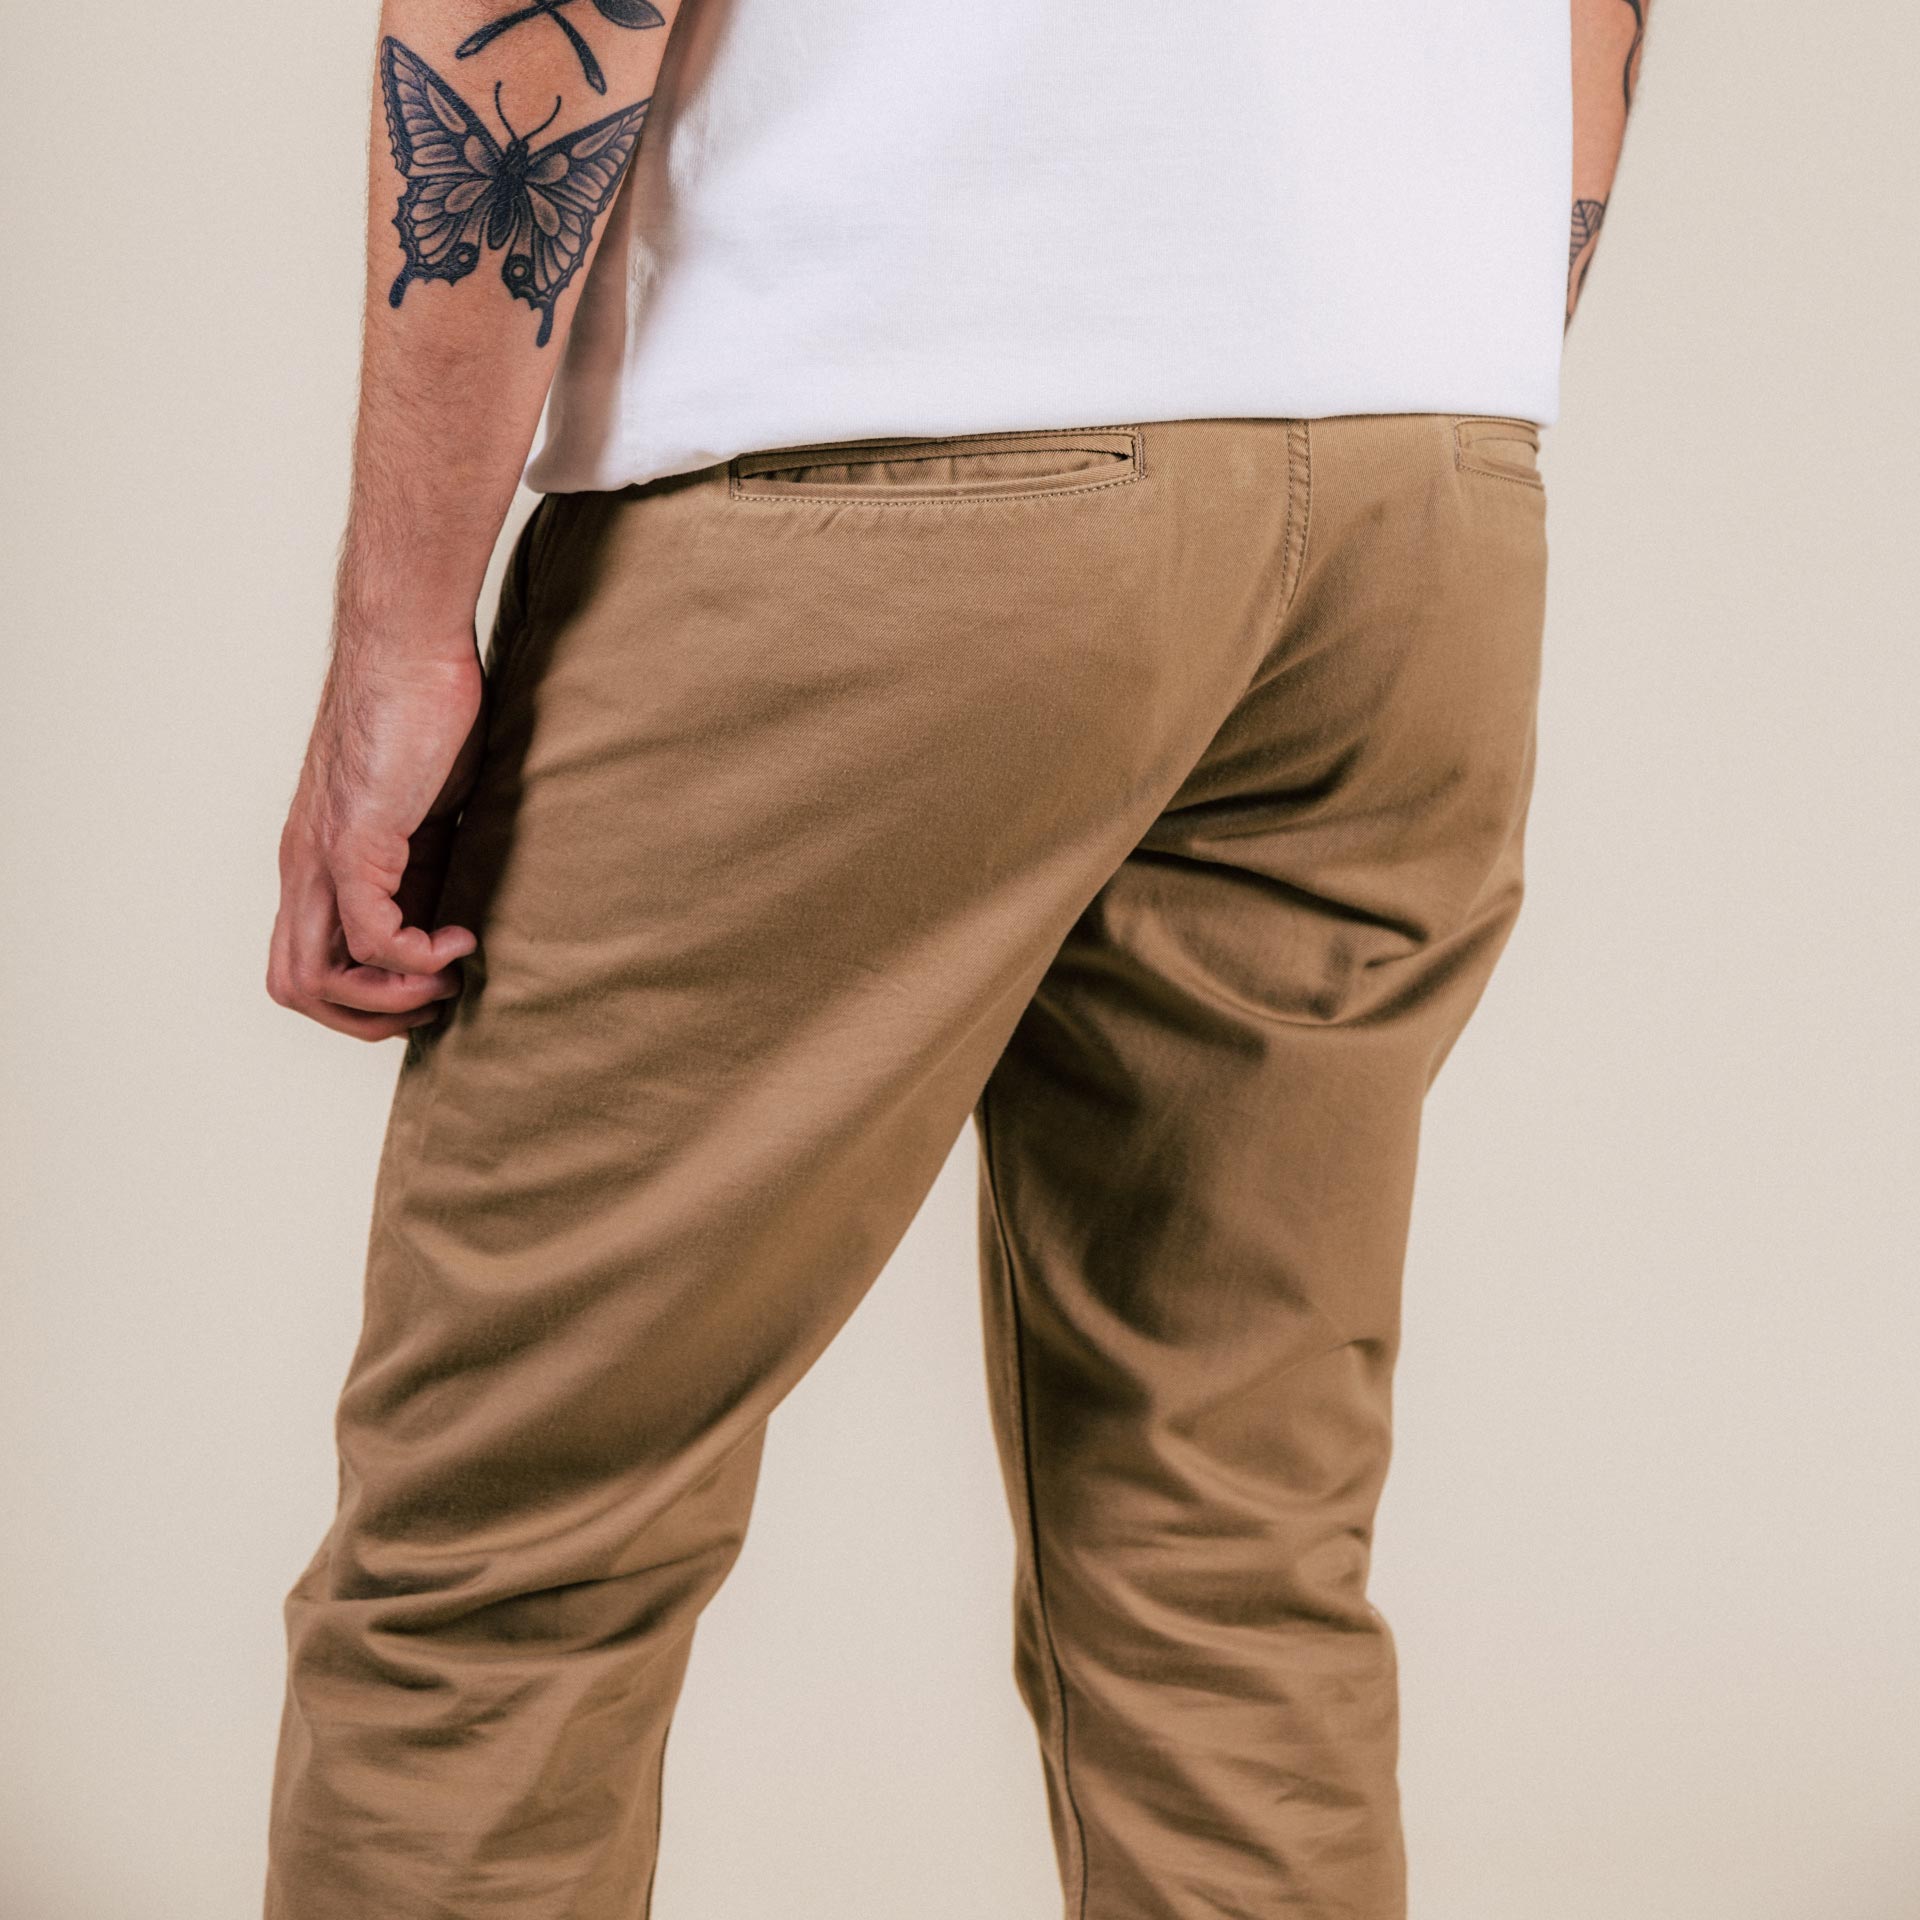 BC-04 RELAXED CHINO 8.5 oz. bronze brown sateen twill